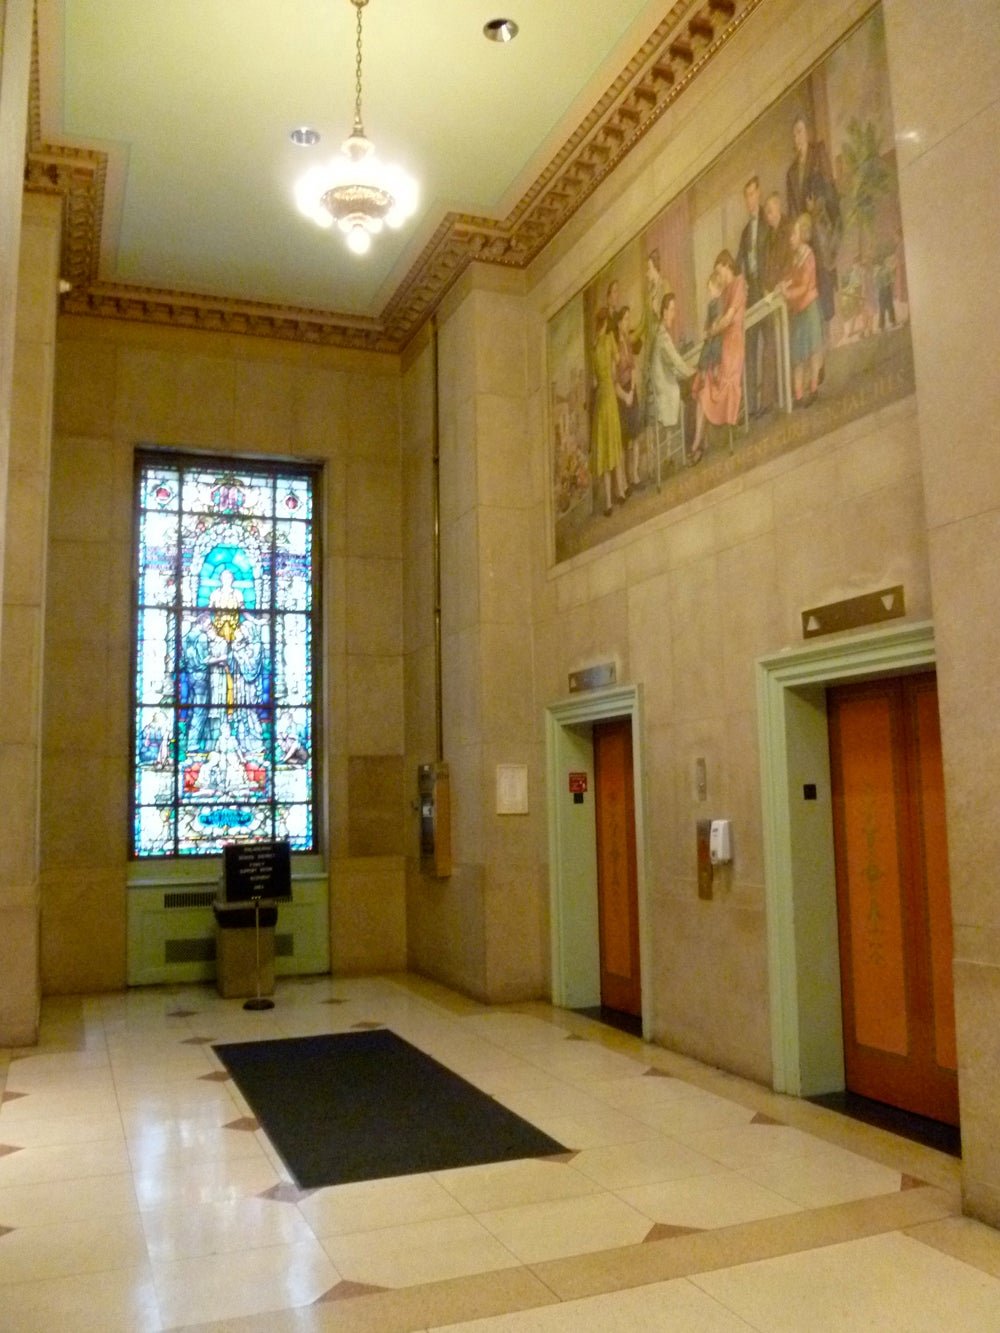 A stained-glass window in Family Court was designed by the nationally renowned D'Ascenzo Studios.